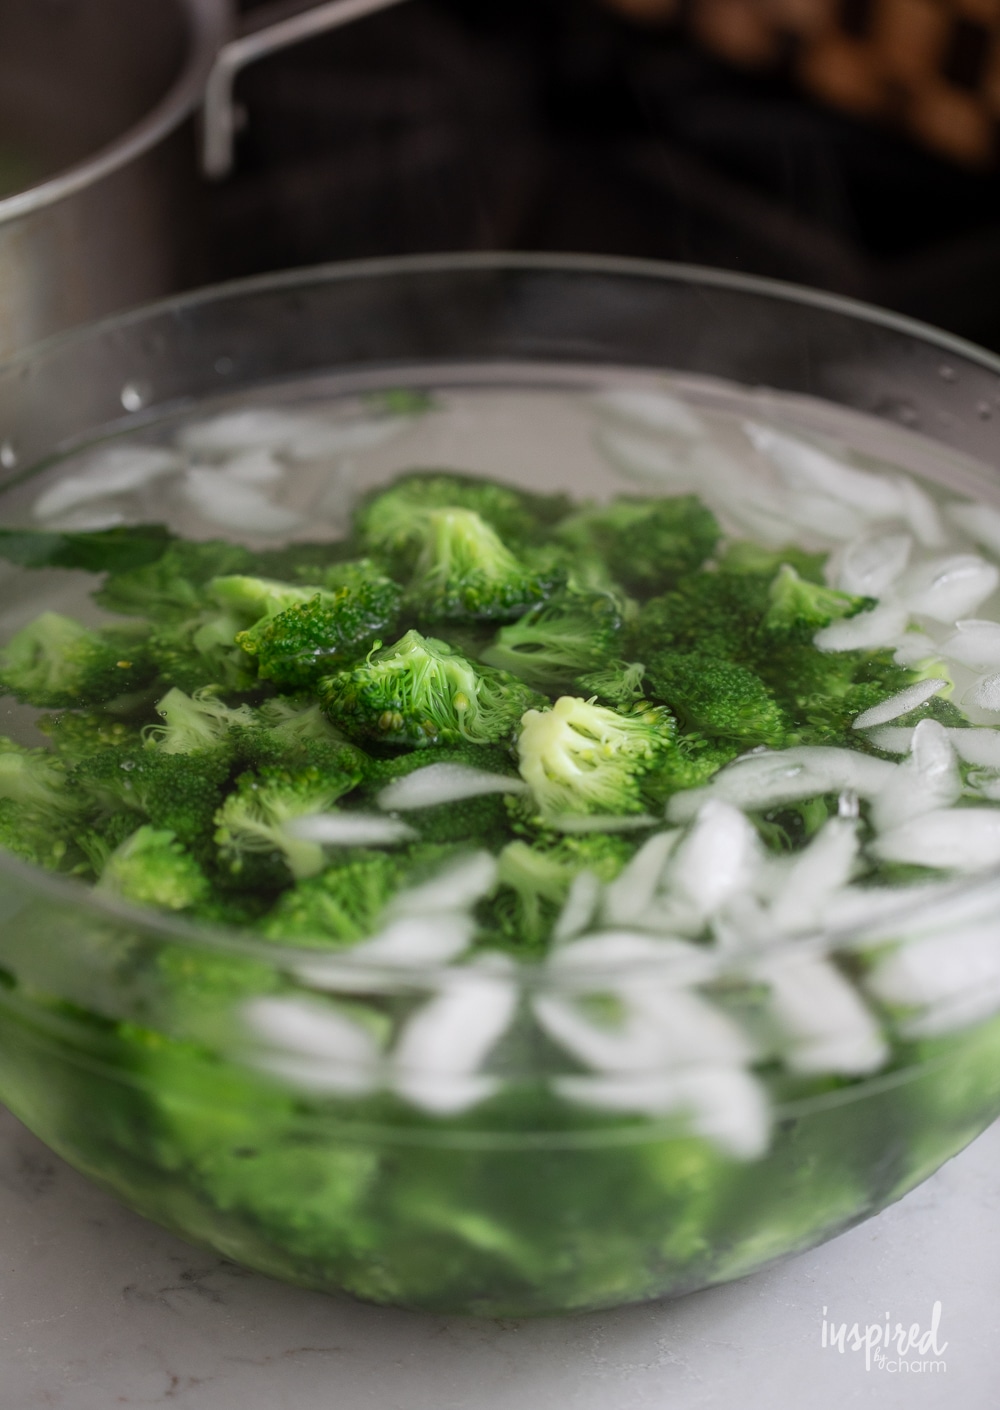 cooked broccoli in an ice bath in a bowl.